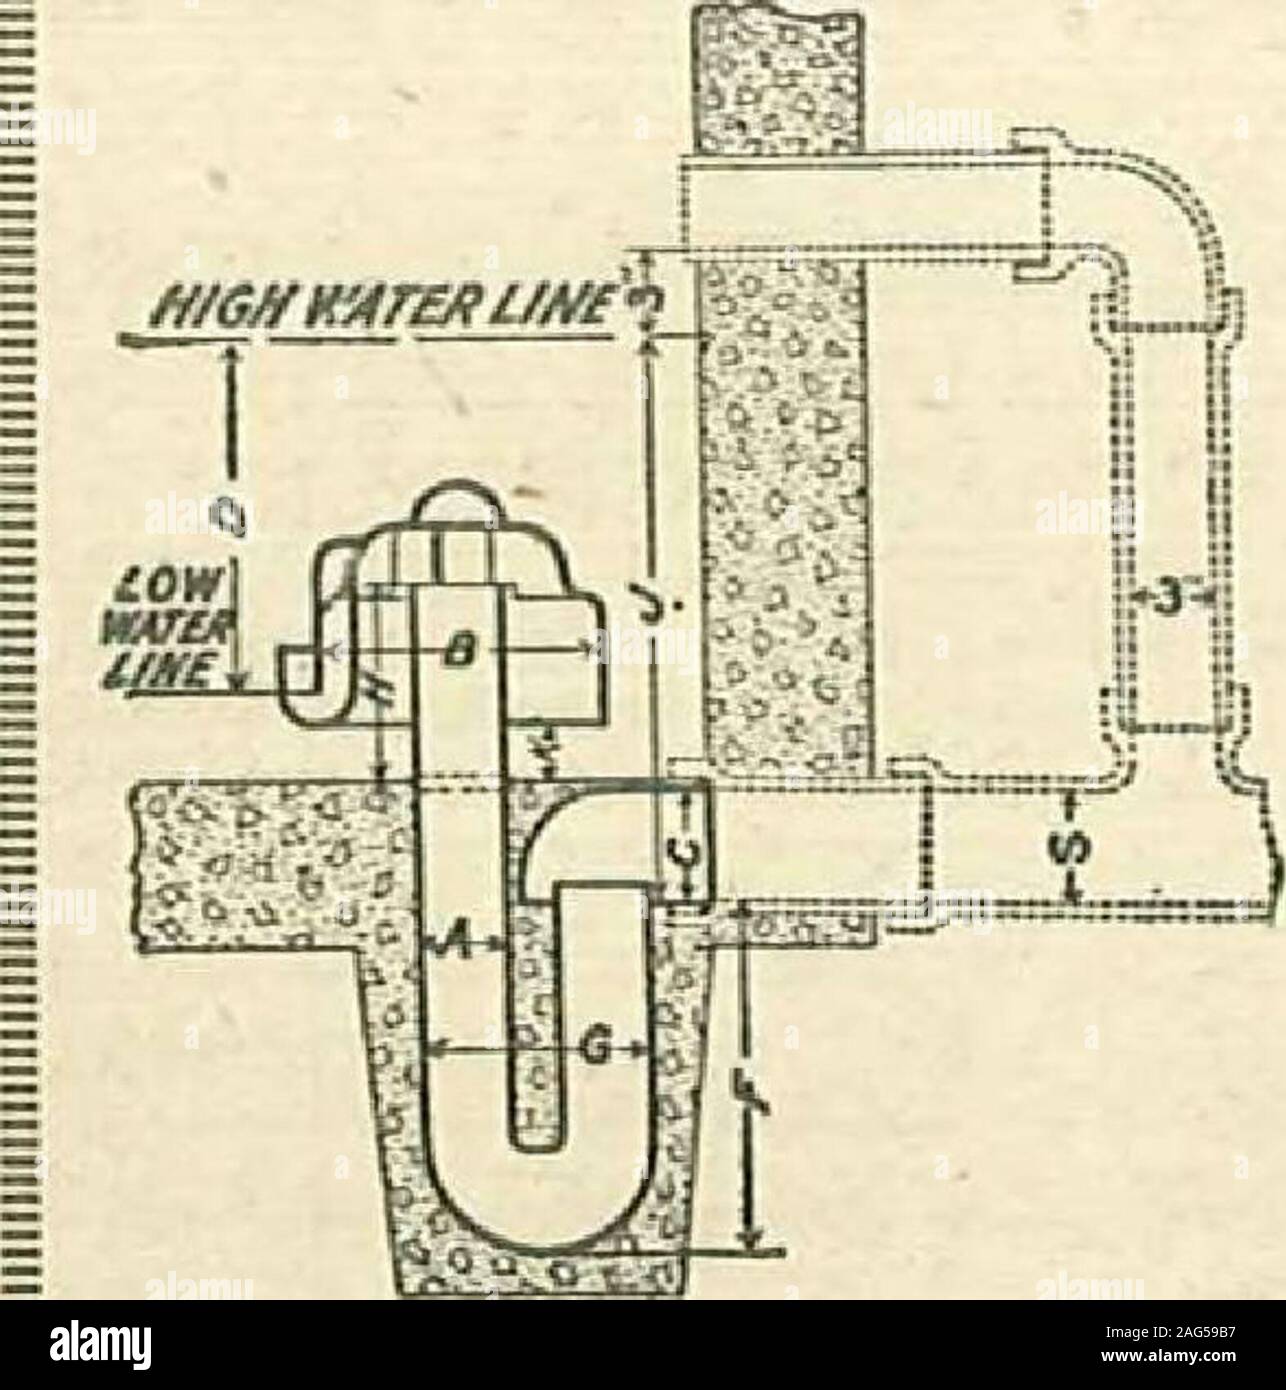 . Instructions for installing modern plumbing systems. er partis working. The main distributing trough at the headof the bed should be made of lx6-inch lum-ber, when serving six persons. The sizeshould be increased when more are served. - iium mm mi mum minim mil limn miiiiii m mini iiiiiniiiiiiiiiiiiiiii iiiiiiiiniii iiimiiimiiiimiiimmiiiiiii n uiiiiuuuiiimuiuumiiuiuuuiimiuiuiiiiitiuumiiiiiiiiimiimimmimii uuiuiiiiuiiiuiimniuj inmiii iiiiiimiimmimiiii| | Hercules Septic Tank Siphon Hercules Siphons are made of cast iron and have no moving parts; they| intended for use with the septic tanks des Stock Photo